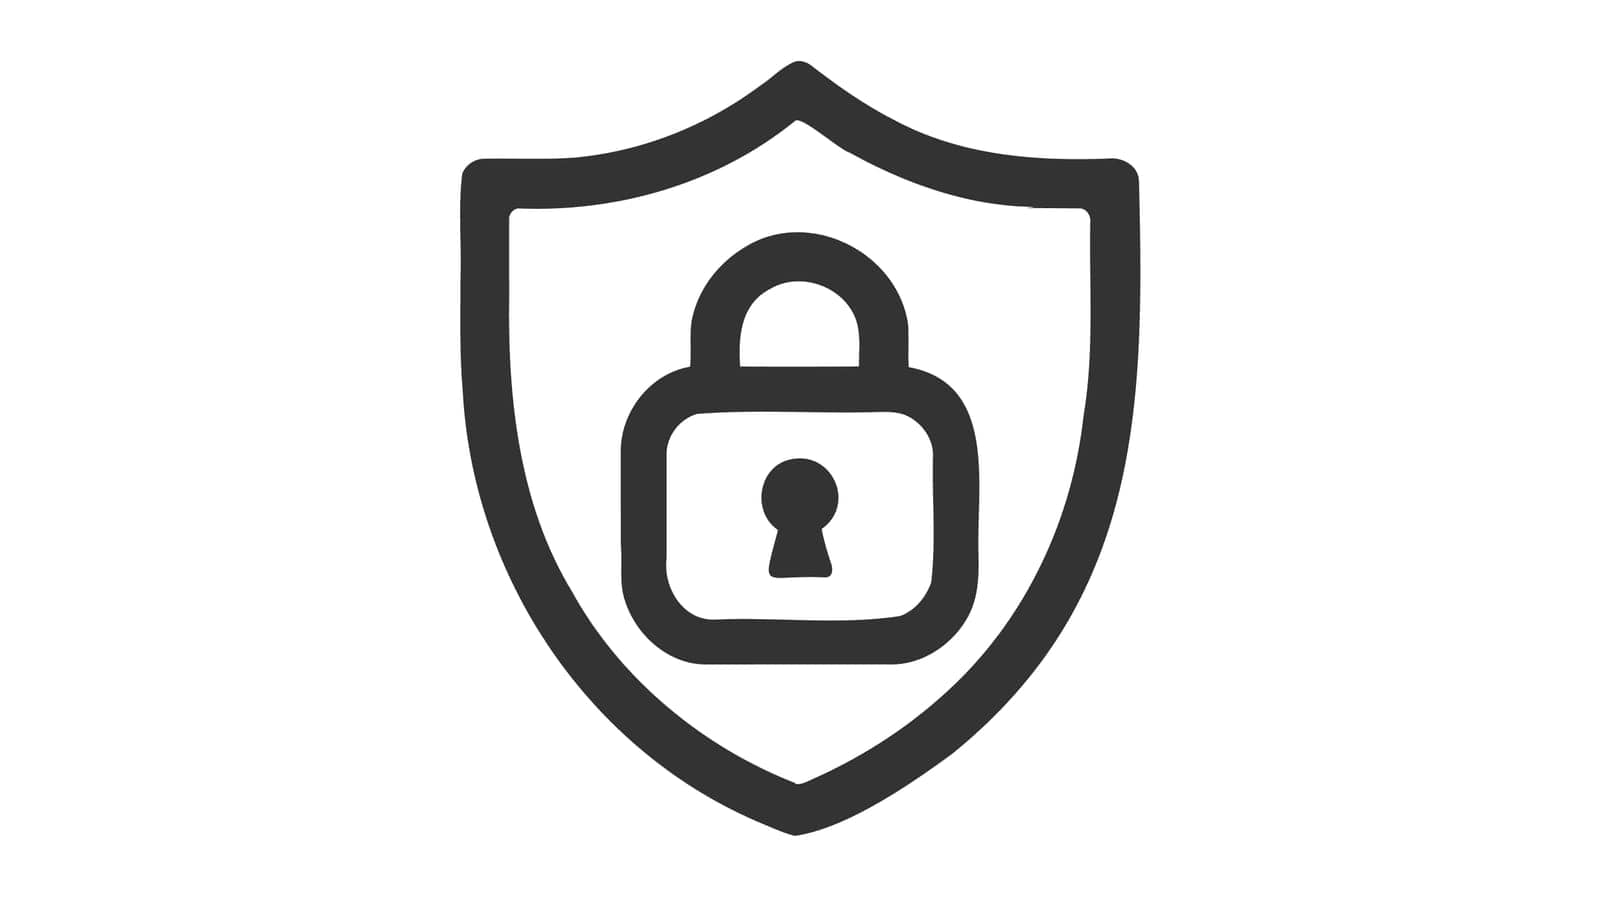 Shield icon. Shield with a checkmark in the middle Protection icon concept by Artisttop